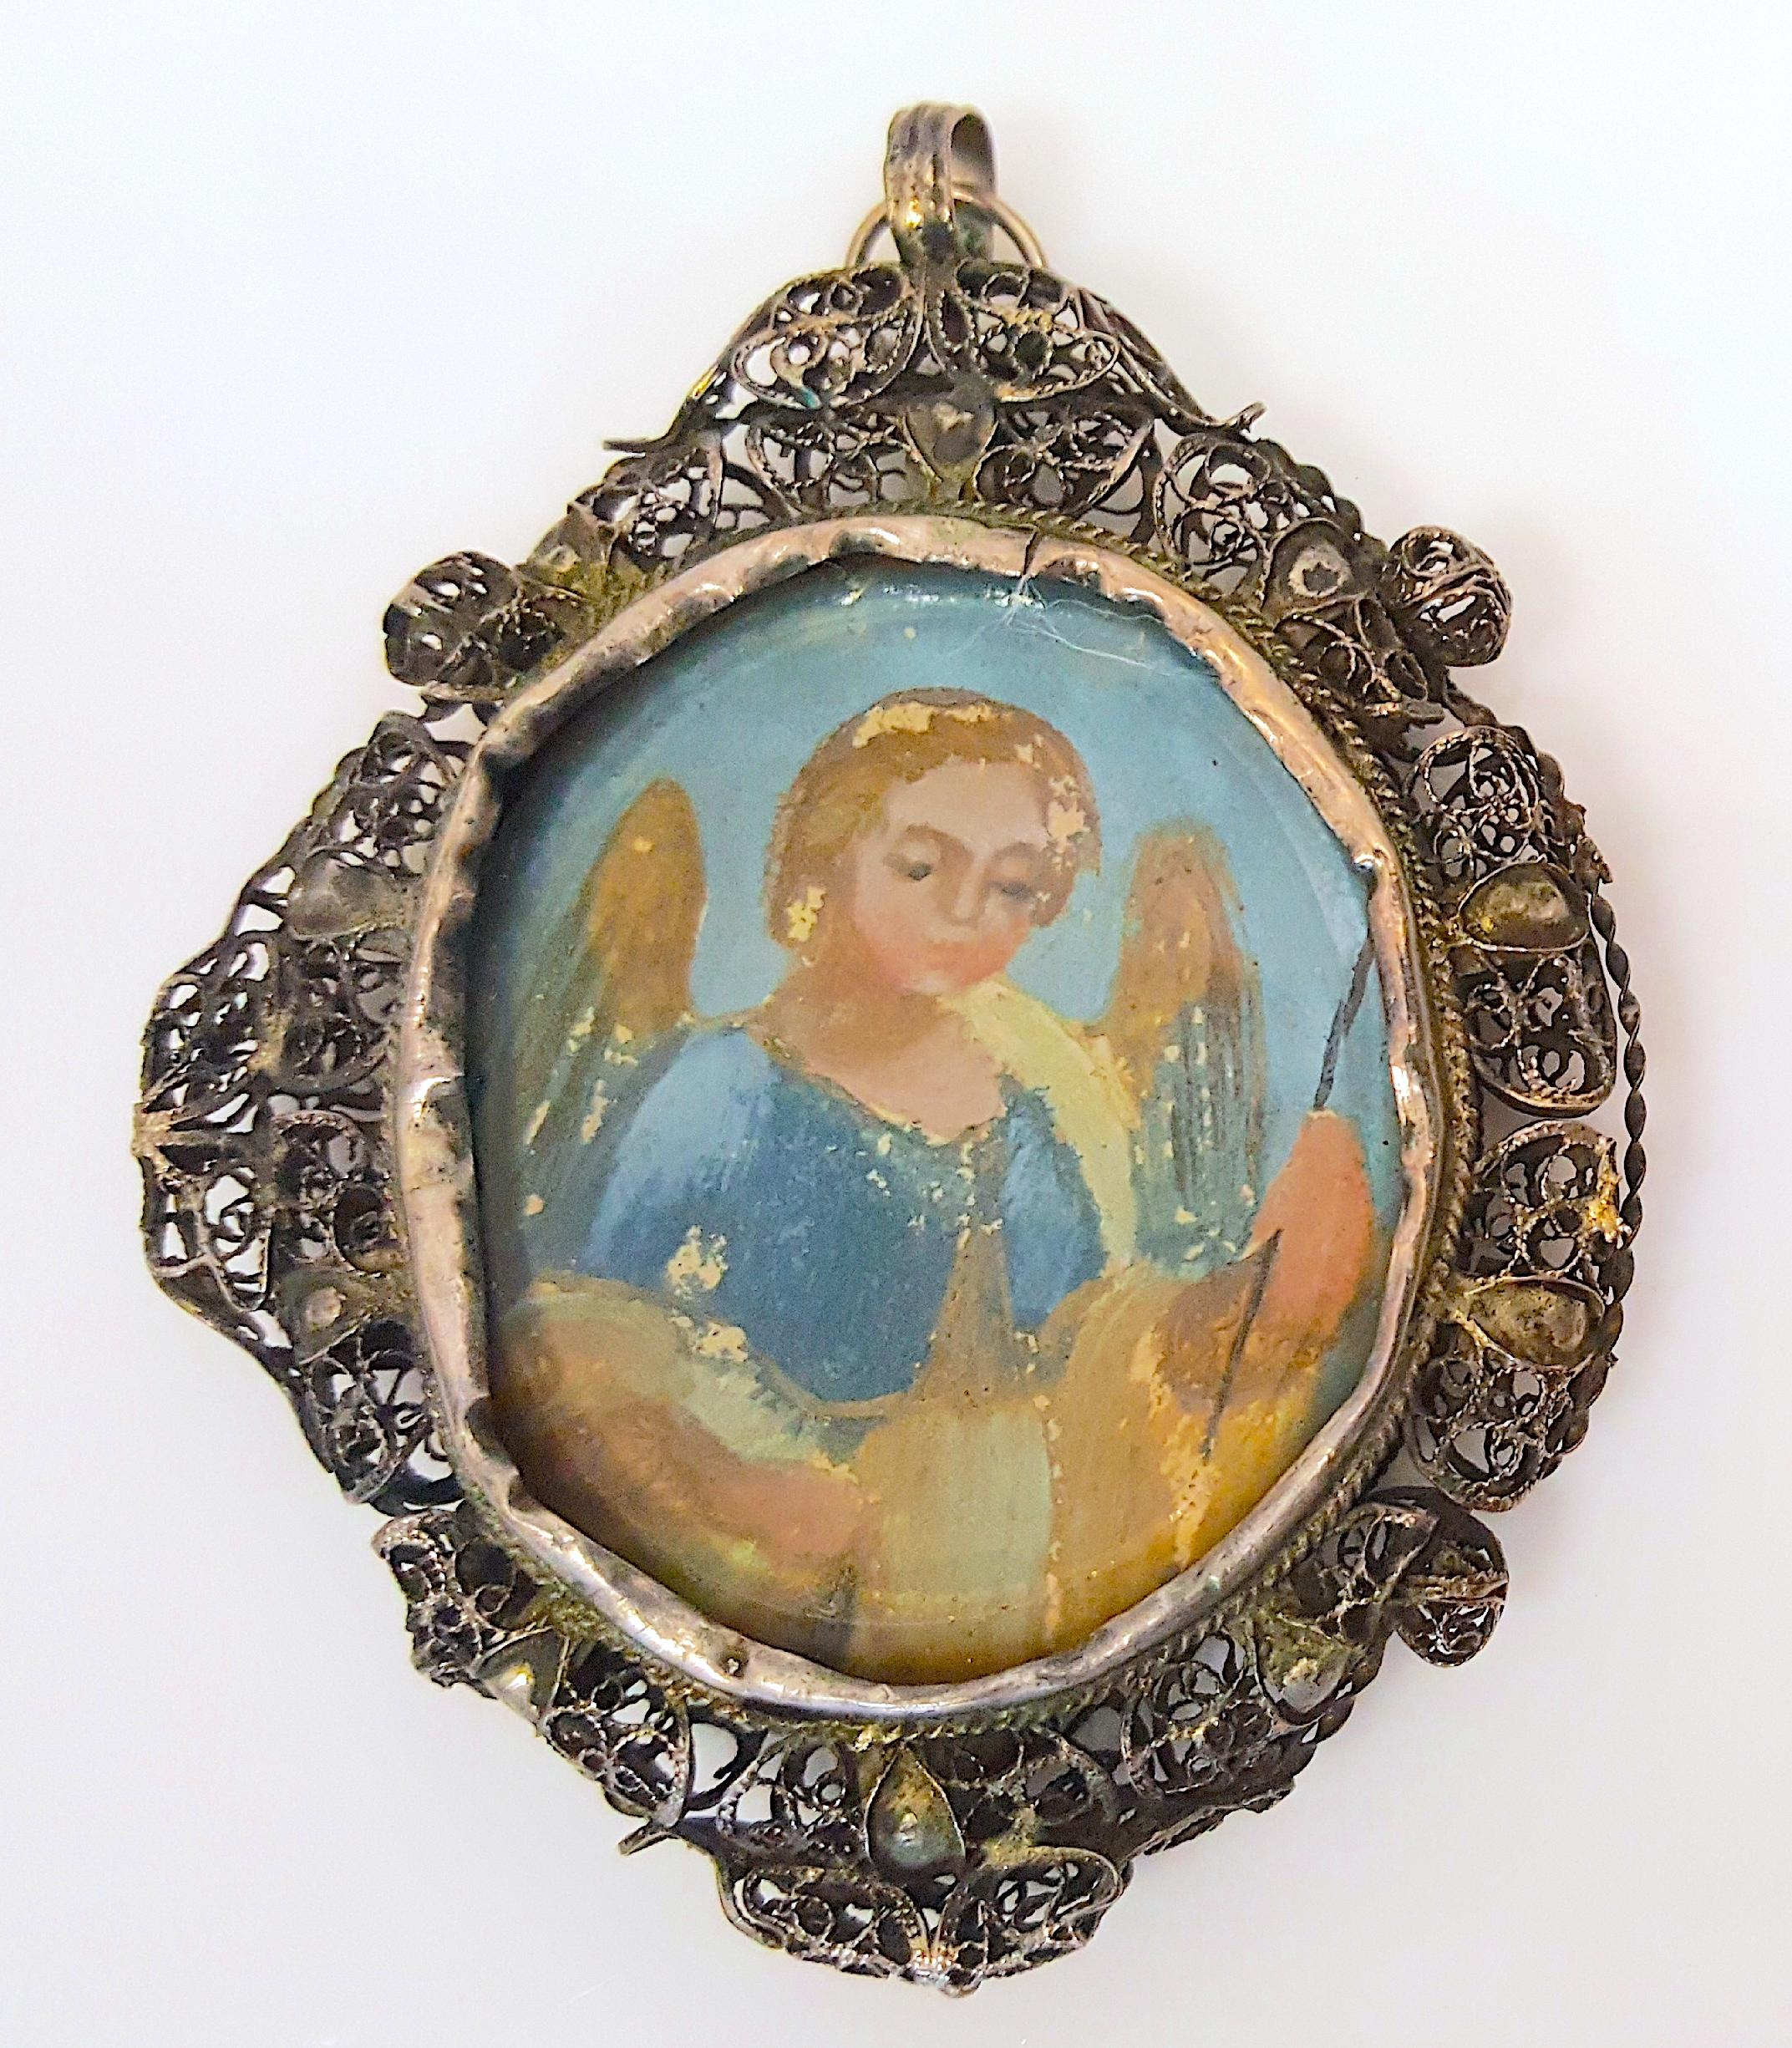 With artistic value as a Renaissance chiaroscuro painting, this early 16th-Century period gilt silver-filigree pendant medallion encases a colorful figure of the upper body of a winged angel with a staff in its left hand, which is protected by a